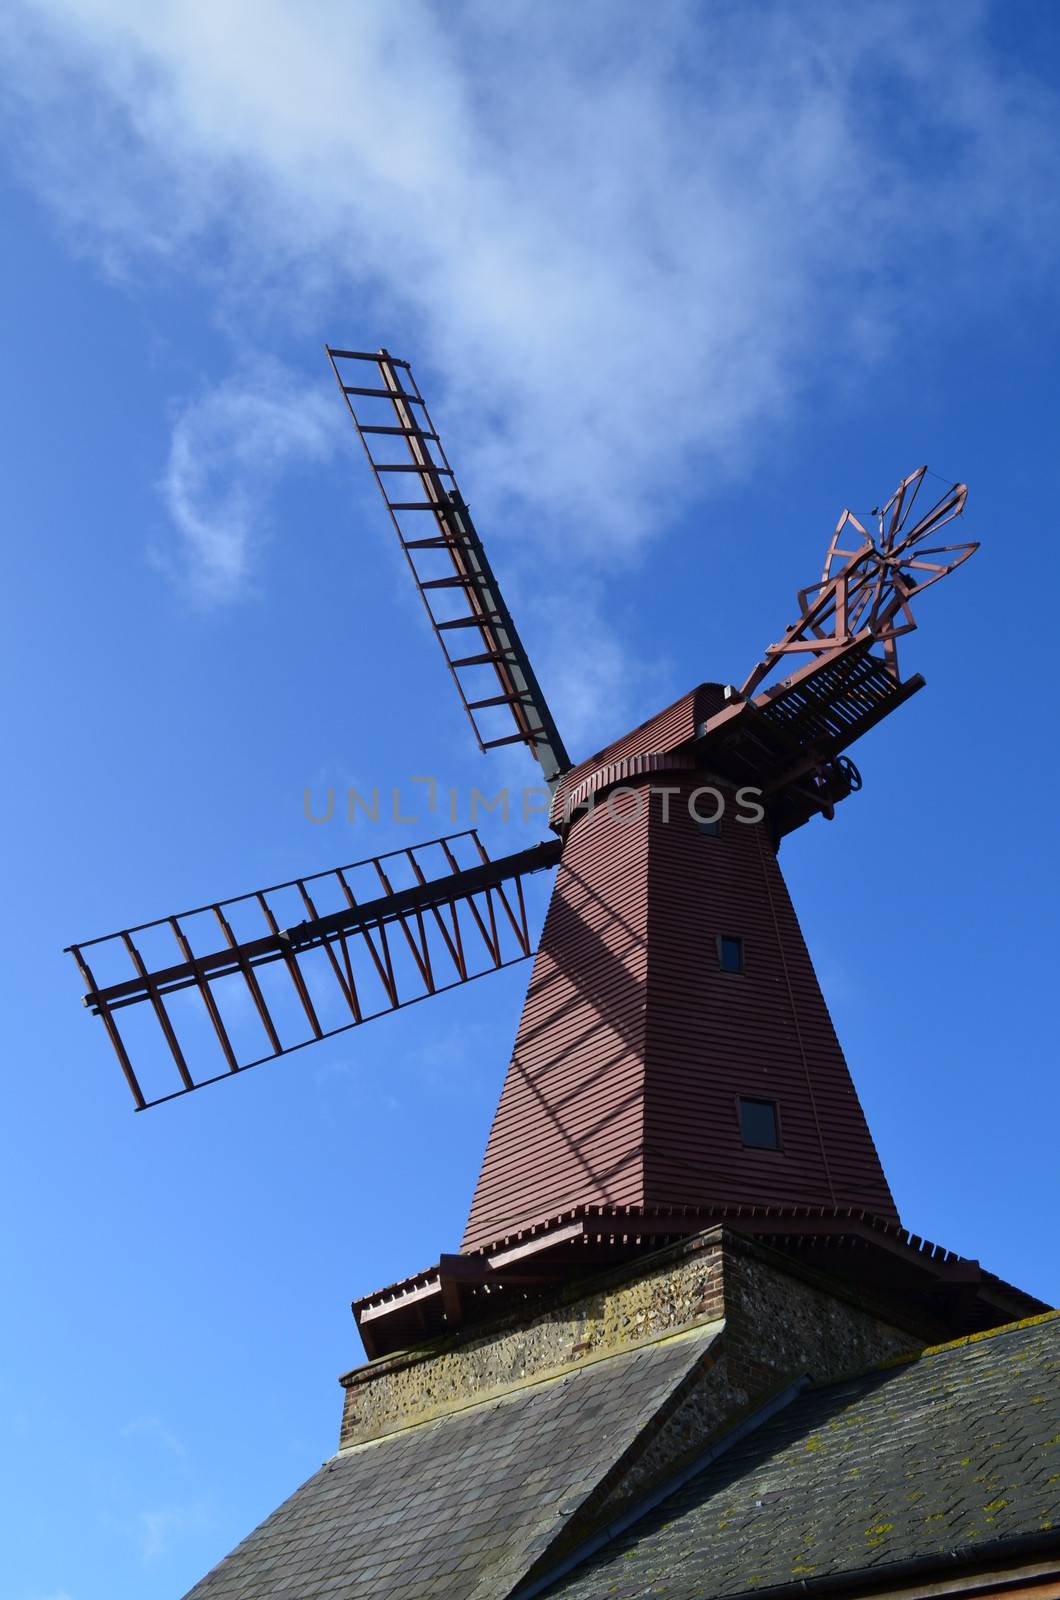 Sussex Windmill by bunsview